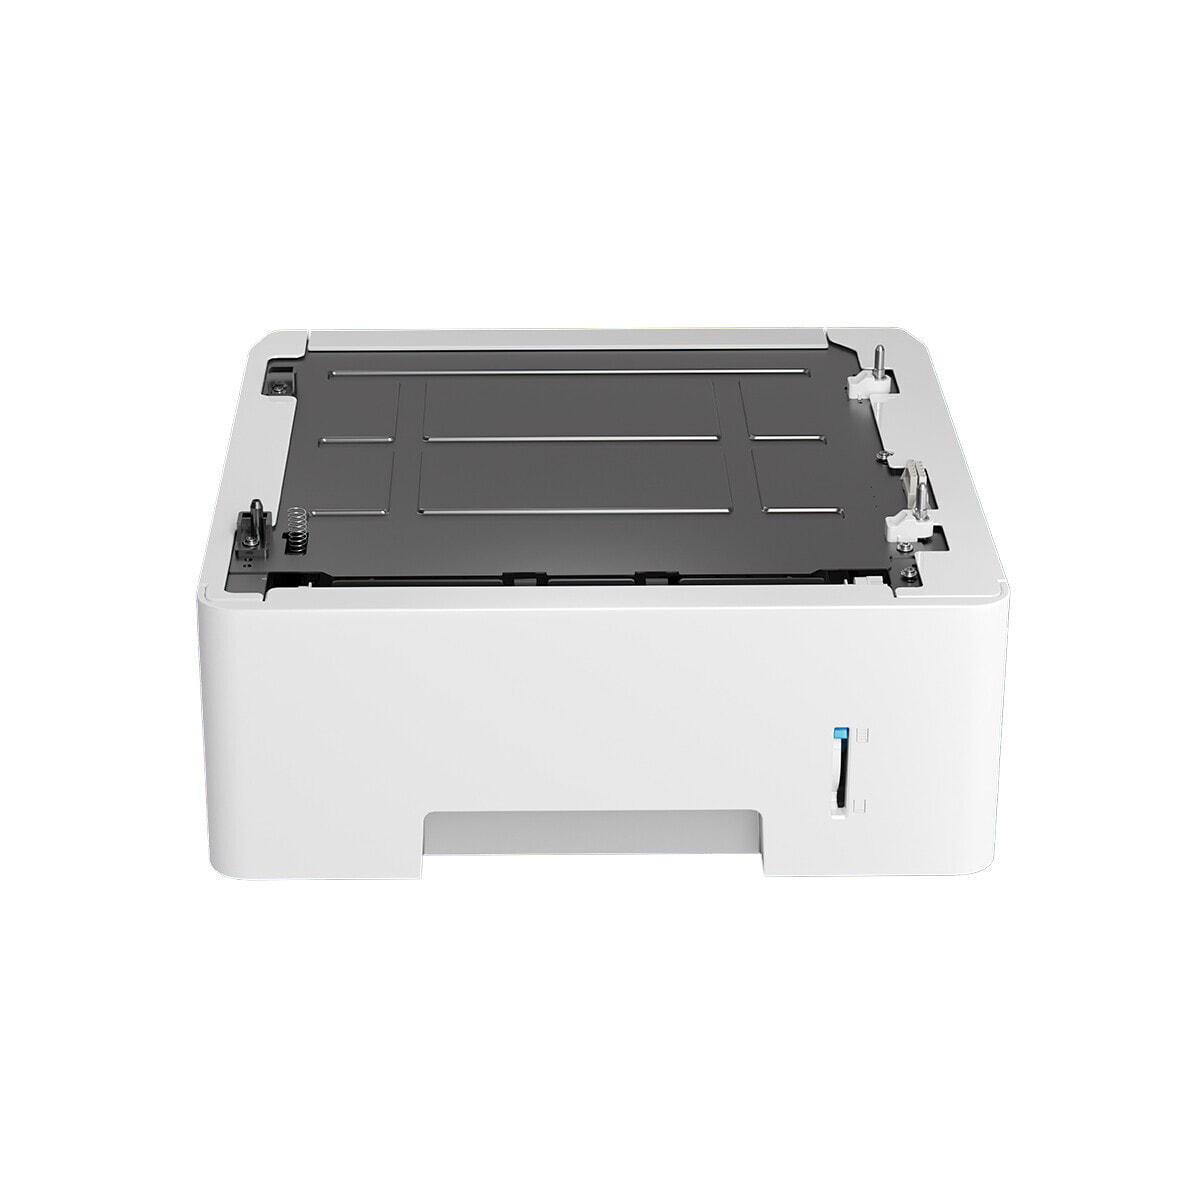 Pantum 550 PAGES OPTIONAL PAPER TRAY(X2) FOR BP5100/BM5100 SERIES